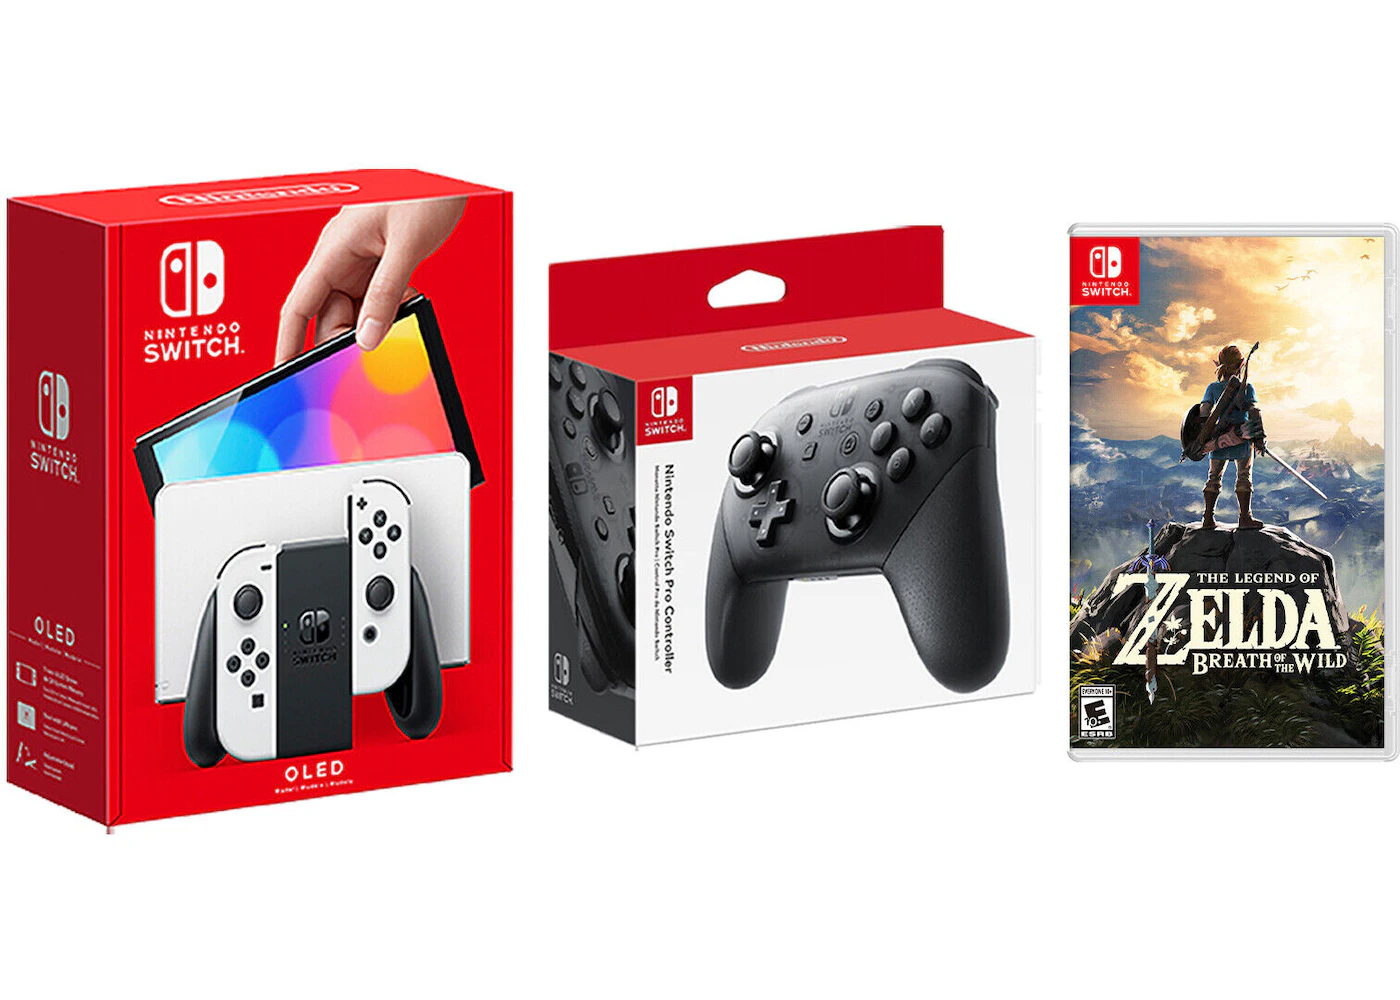 Nintendo Switch The Legend of Zelda: Breath of the Wild Special Edition  Video Game Bundle - US